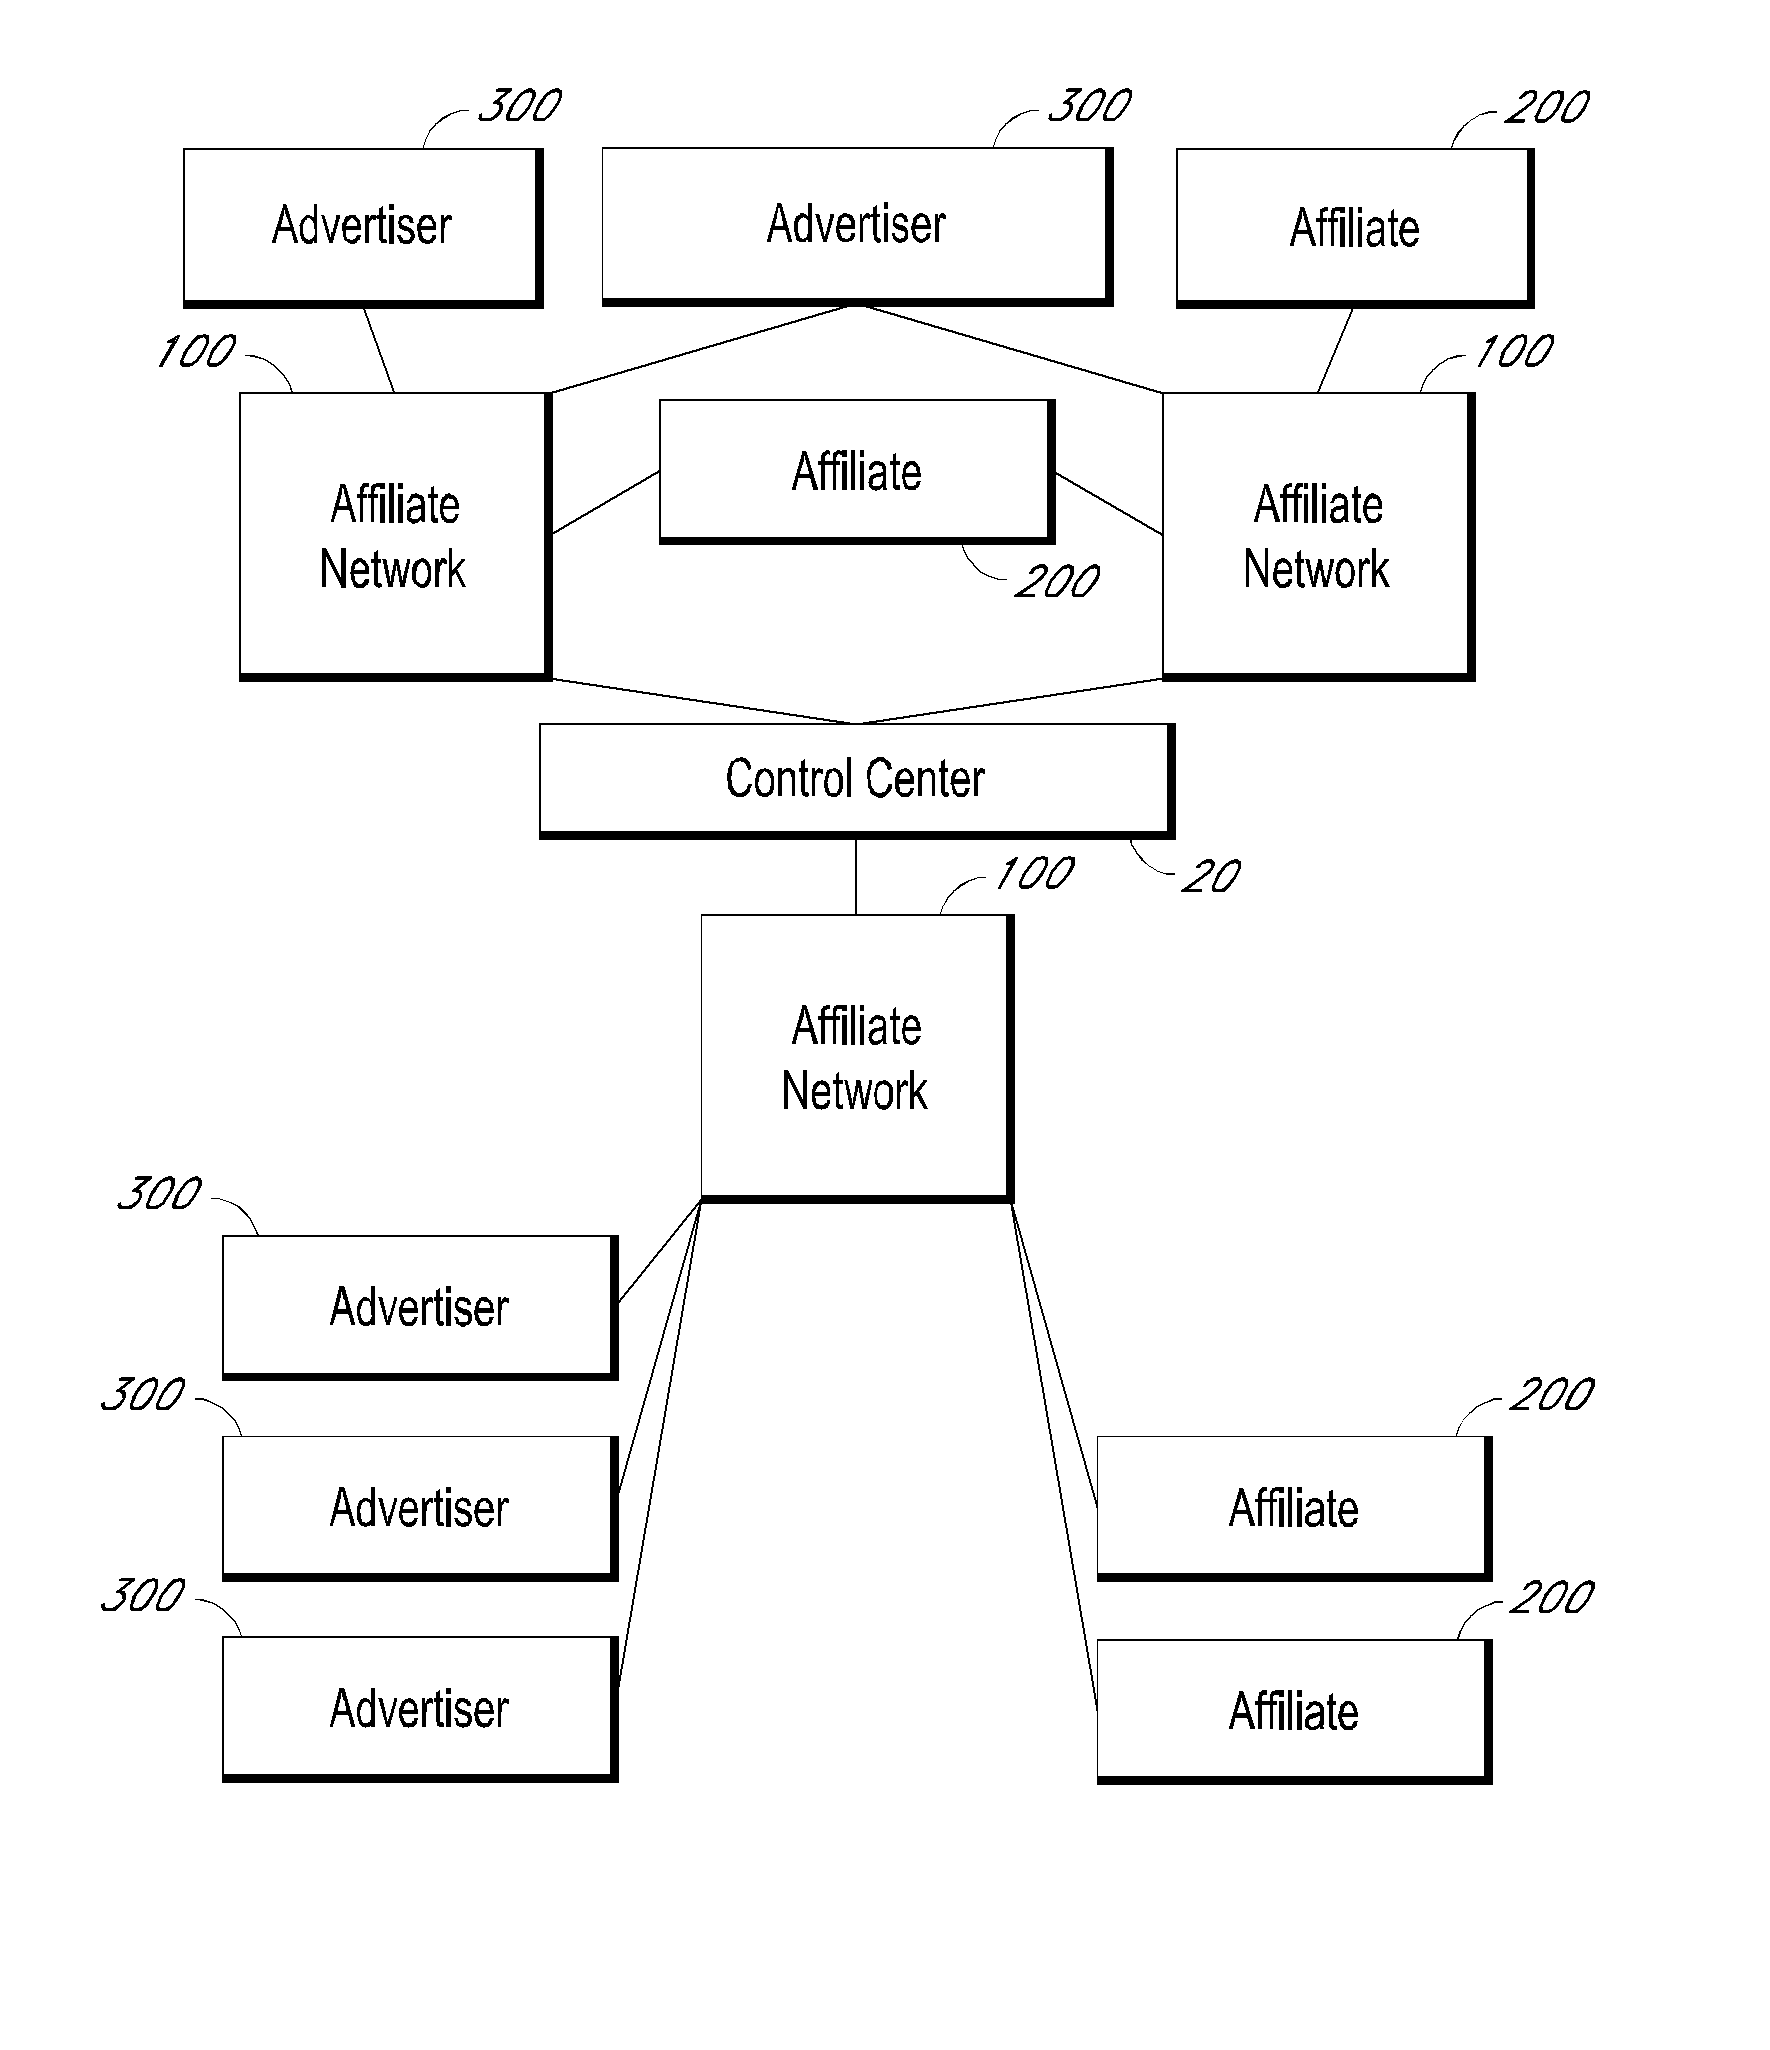 Methods and systems for processing and managing telephonic communications